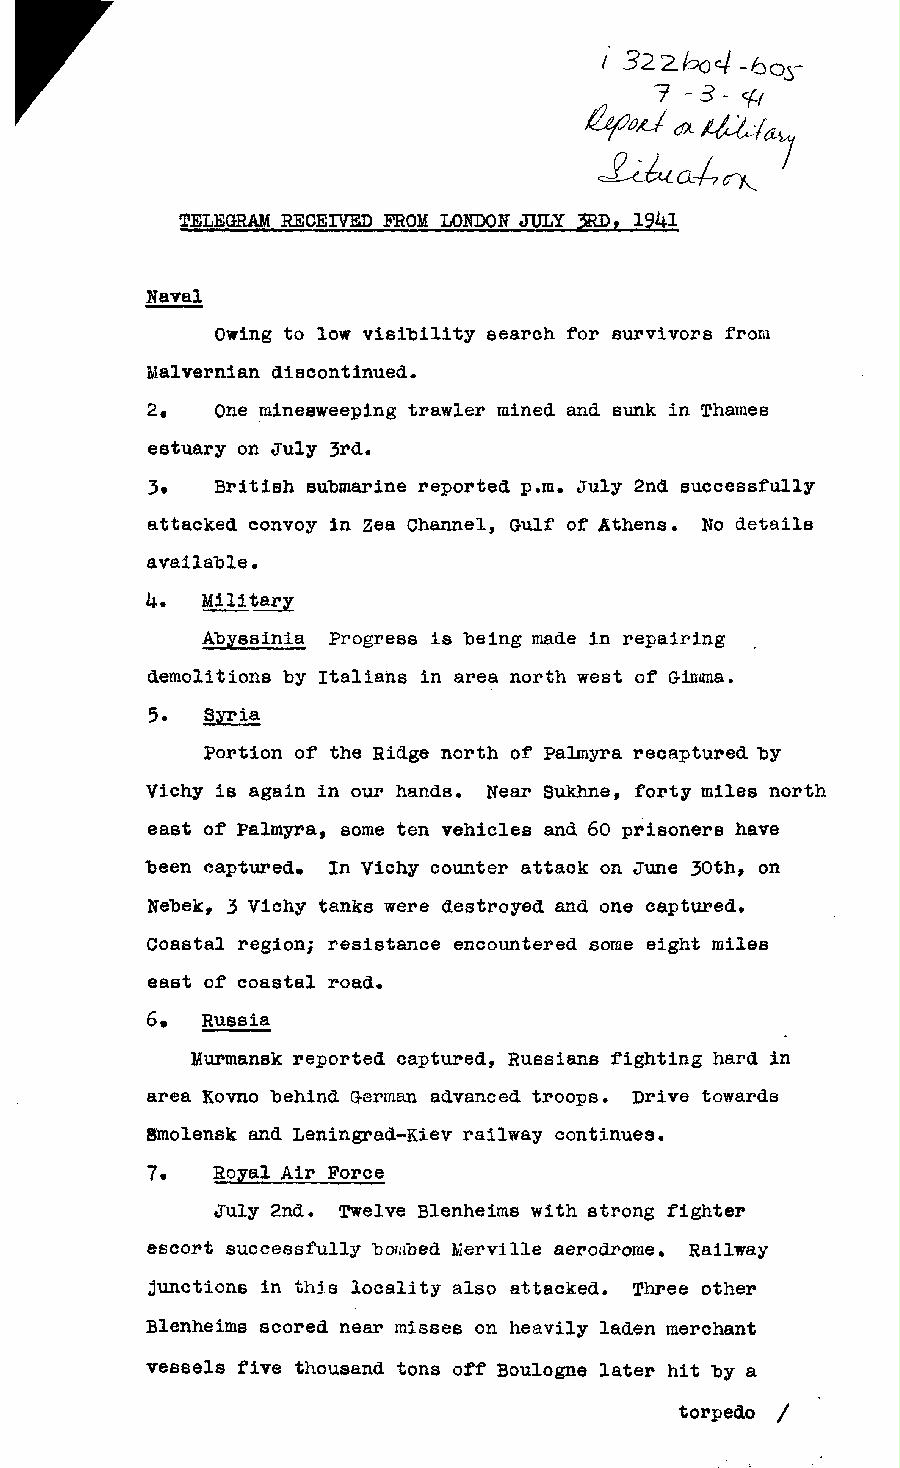 [a322b04.jpg] - Report on military situation 7/3/41